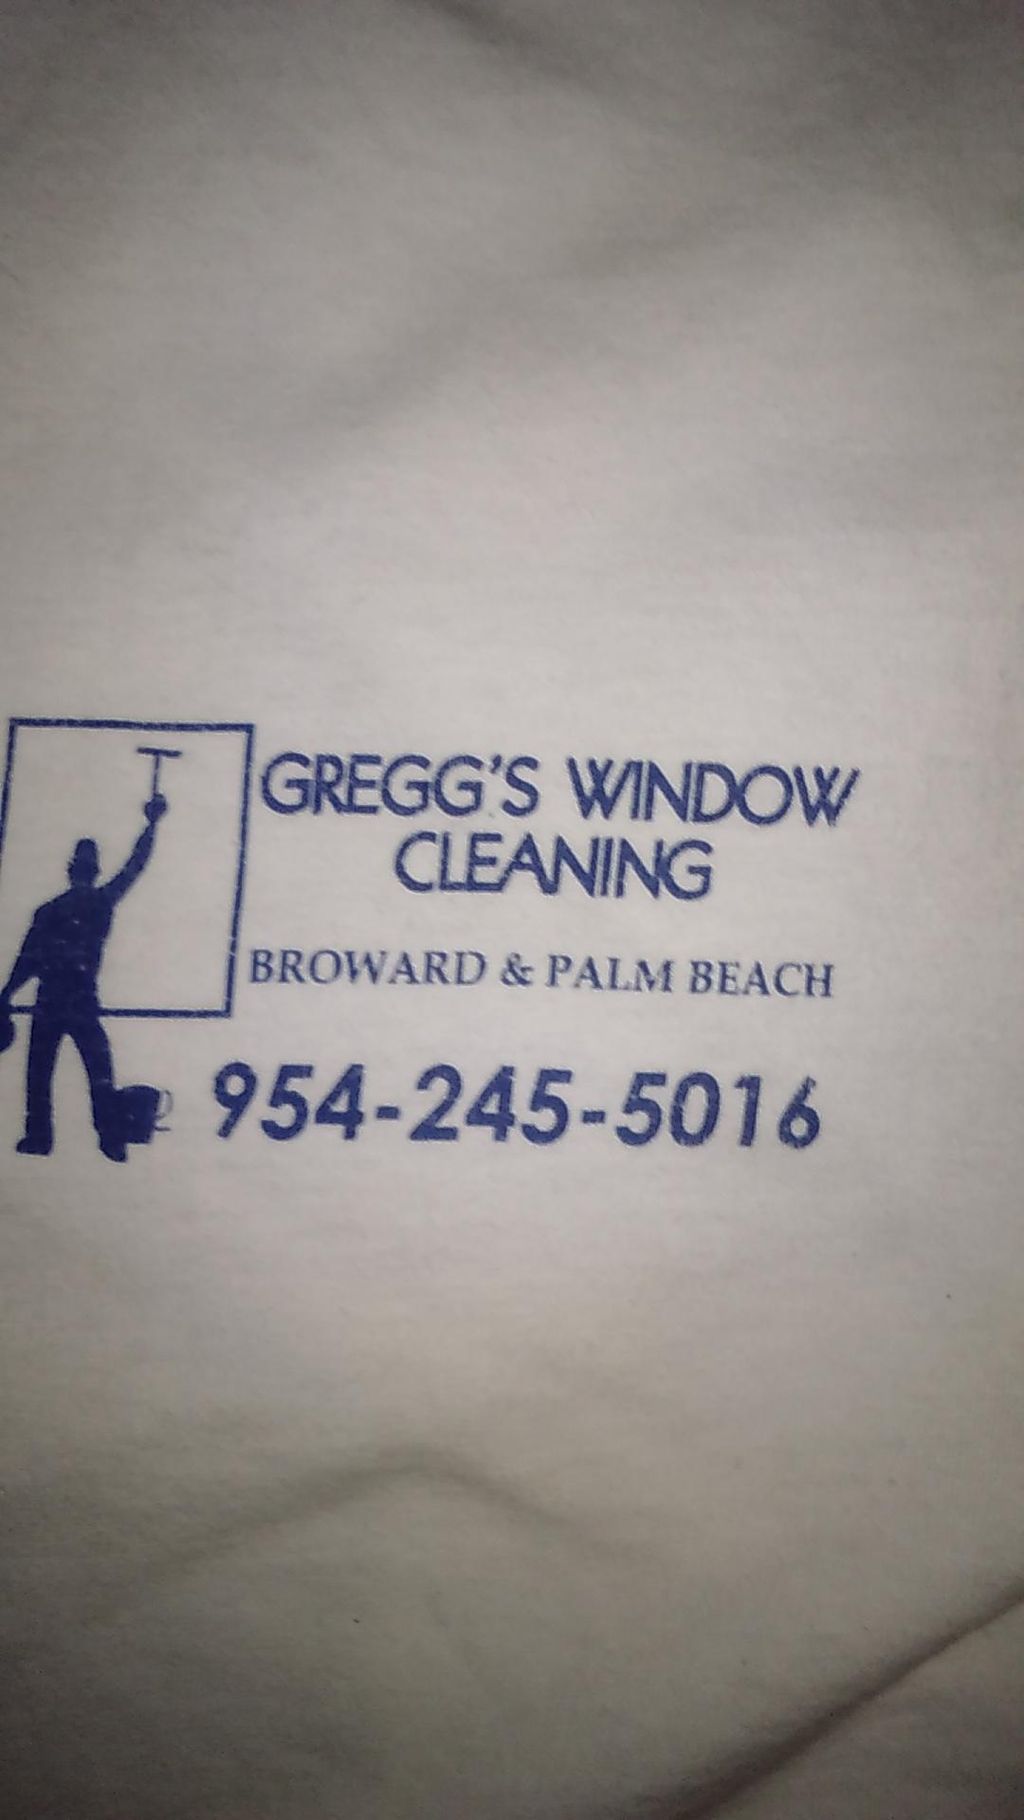 Gregg's Window Cleaning